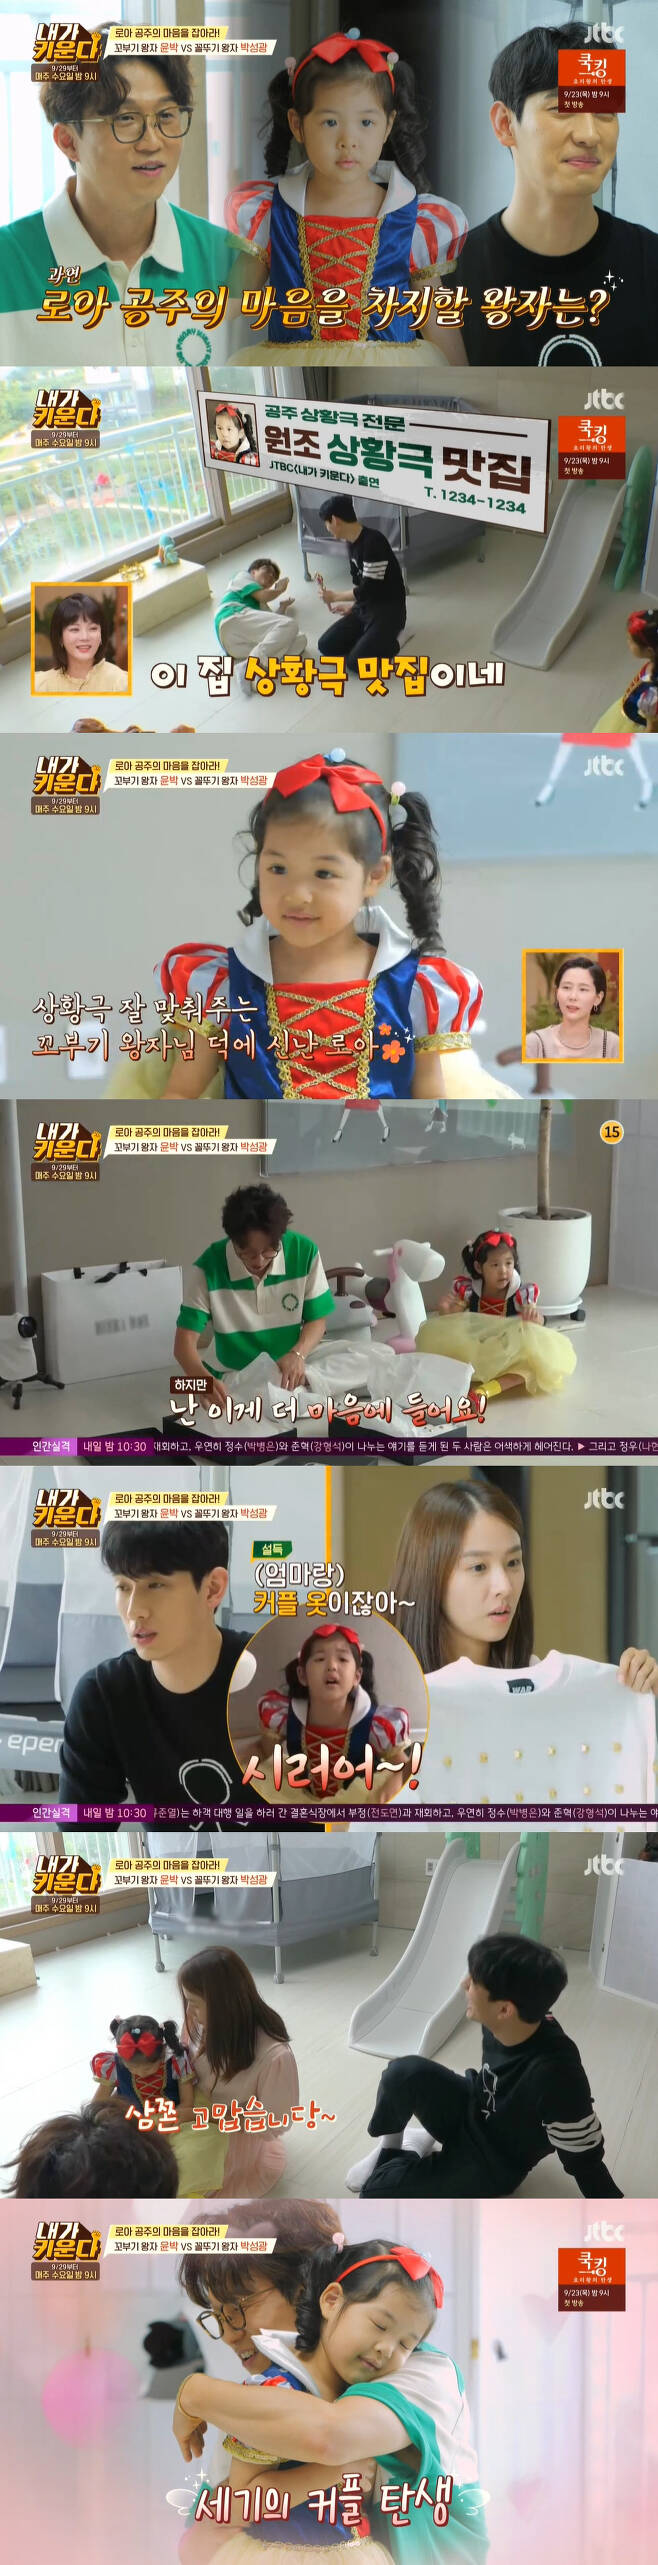 Chae Rim first unveiled 44 months son Minwoo and houseOn the 17th, JTBC entertainment program Brave Solo Parenting - I Raise, solo parenting 4th year Chae Rim released 44 months son Minwoo for the first time.On this day, Chae Rims son Minwoo said, Why are you dressed beautifully? And It is pretty to tie your mothers hair.He was also an English genius who surprised mothers by reading the alphabet from the morning and speaking English freely.Benjamín Vicuña also predicted the birth of a new food star who crossed the seat.In addition, Chae Rims house was the first to be released, and Chae Rims Parenting Warehouse was equipped with all three refrigerators.Jo Yoon-hee also invited Yoon Park and Park Sung-Kwang, who were usually friends, to their home.On this day, Yoon Park shot Roars taste with a set of Roar-customized princess gifts, and he also transformed Roar into a prince with a crown and cape prepared by hand.Park Sung-Kwang appeared in a dinosaur doll for Roar, who likes dinosaurs, but the genre changed rapidly with a horror movie in a threatening visual.At that time, Roar said, You only do housework. He immediately went into the situation drama and embarrassed Yoon Park and Park Sung-Kwang.When the pair were adjusting to parenting mode, Roar laughed at Yoon Park with a confident step into the time of Prince Choices of Prince Kobshoo and Prince Konkoo Park Sung-Kwang.Park Sung-Kwang brought out a gift prepared to capture Roars heart, but Roar shouted, I like this more.Jo Yoon-hee then convinced him to just watch but Roar was left baffled by tears in frustration that he would ask to change his princess clothes.Afterwards, Yoon Park and Park Sung-Kwang opened Princeland and spent time with Roar in a mixed situation.Then the time of the second Prince Choices, Roar made Park Sung-Kwang laugh at Choices and Park Sung-Kwang.Kim Na-young enjoyed camping, enjoying Sooyoung at Shin-Urayasu Station, Lee Joon and the Valley.Kim Na-young, including Brother Shin-Urayasu Station X Lee Joon, who is equipped with the latest water-playing items, has embarrassed all performers with his unconventional valley fashion wearing a one-piece Sooyoung suit.Kim Na-young held Lee Joon, who was afraid of water, and then Shin-Urayasu Station showed three-stage integration Sooyoung saying I am out of my mothers back.After the watering, Kim Na-young spent time healing while the children were cycling while preparing for dinner.Kim Na-young prepared a hot ribs and the children who were hungry with the water were stimulated by the taste of viewers with a special meat food.Shin-Urayasu Station and Lee Joon laughed at the dance dance in line with the BTS song.Kim Na-young said, I think I dreamed, but Its not hard to drive long distances. I think I get more strength when I go to Camping.Kim Hyun-Sook and Benjamín Vicuñai have set out to prepare a special recreational ceremony for the palatable Grandmas Boy.Kim Hyun-Sook said, My mother had a colonoscopy, and I found a polyp, and I had surgery because I needed surgery.Kim Hyun-Sooks mother said, We want Benjamín Vicuña to be healthy until I go to middle and high school. I was so sad if I could not take care of Benjamín Vicuña because I was not healthy.Kim Hyun-Sook and Benjamín Vicuña looked directly at the chapter and prepared a meal for Grandmas Boy.But a short time later, Benjamín Vicuña was annoyed by Grandmas Boy when he saw the toys broken, and Kim Hyun-Sook, who watched it, eventually became angry and loud.Kim Hyun-Sook pointed out the key to Benjamín Vicuñai correctly, and Benjamín Vicuñai burst into tears at the image of his determined mother.Kim Hyun-Sook said, Grandmas Boy, you should not be irritated that your grandfather is good.Grandmas Boy, I do not want to do it to my grandfather. After the incident, Benjamín Vicuña read his mind.Benjamín Vicuñai put it in Grandmas Boy arms and said, I hate my mother, and Grandmas Boy delivered her mothers heart, saying, I am the mother who loves Benjamín Vicuña in this world.Kim Hyun-Sook then served the food prepared directly from beef porridge to pasta salad and homemade hamburger, and finished the pleasant day with family all delicious.